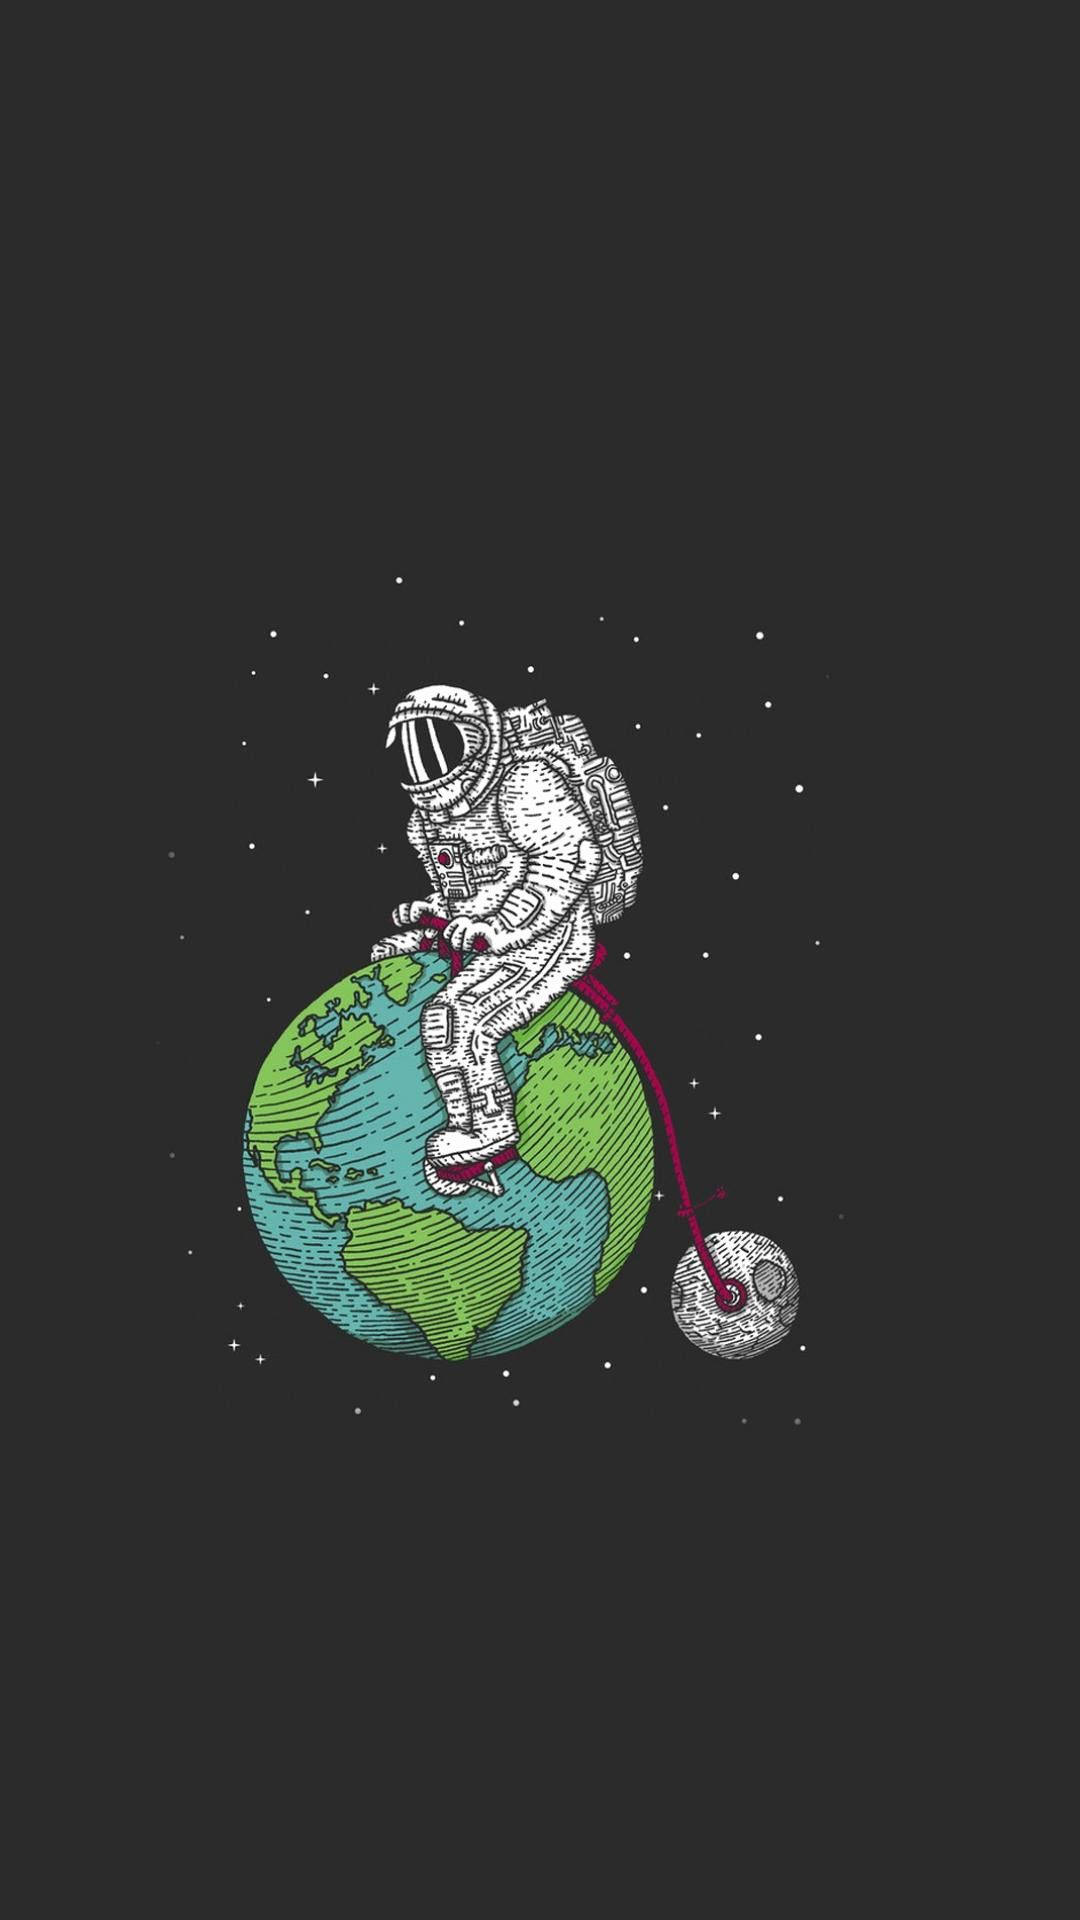 Clever Astronaut Cycling Wallpaper